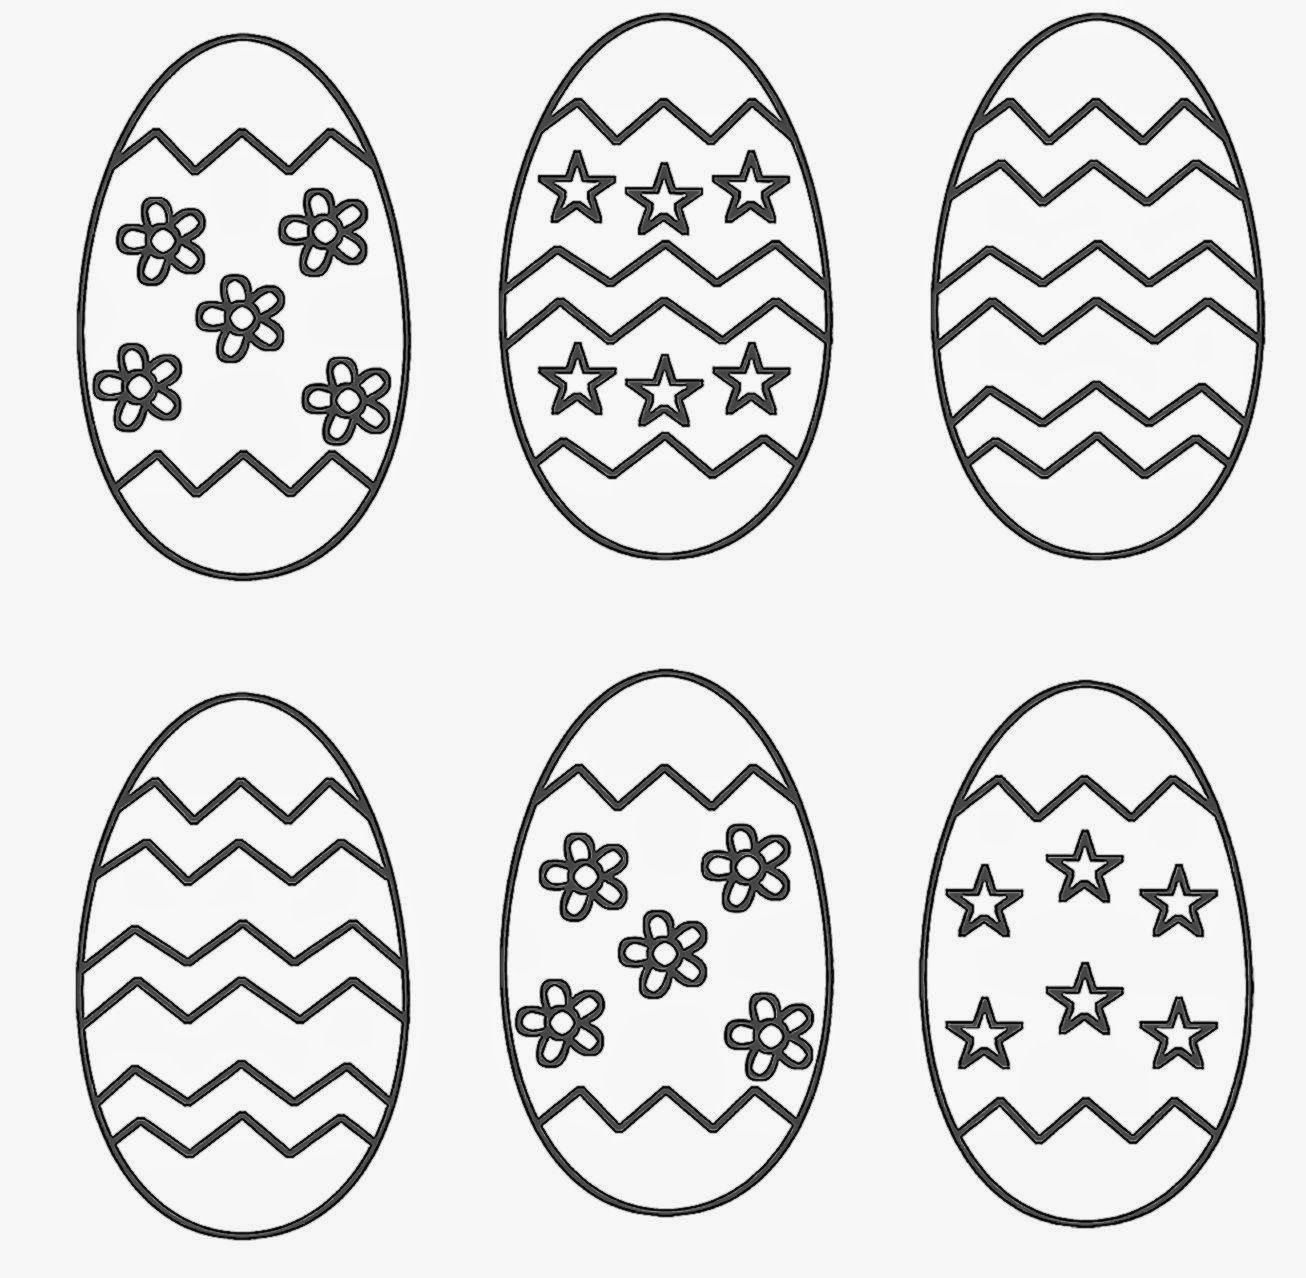 Hard Easter Eggs Coloring Pages | Coloring Online